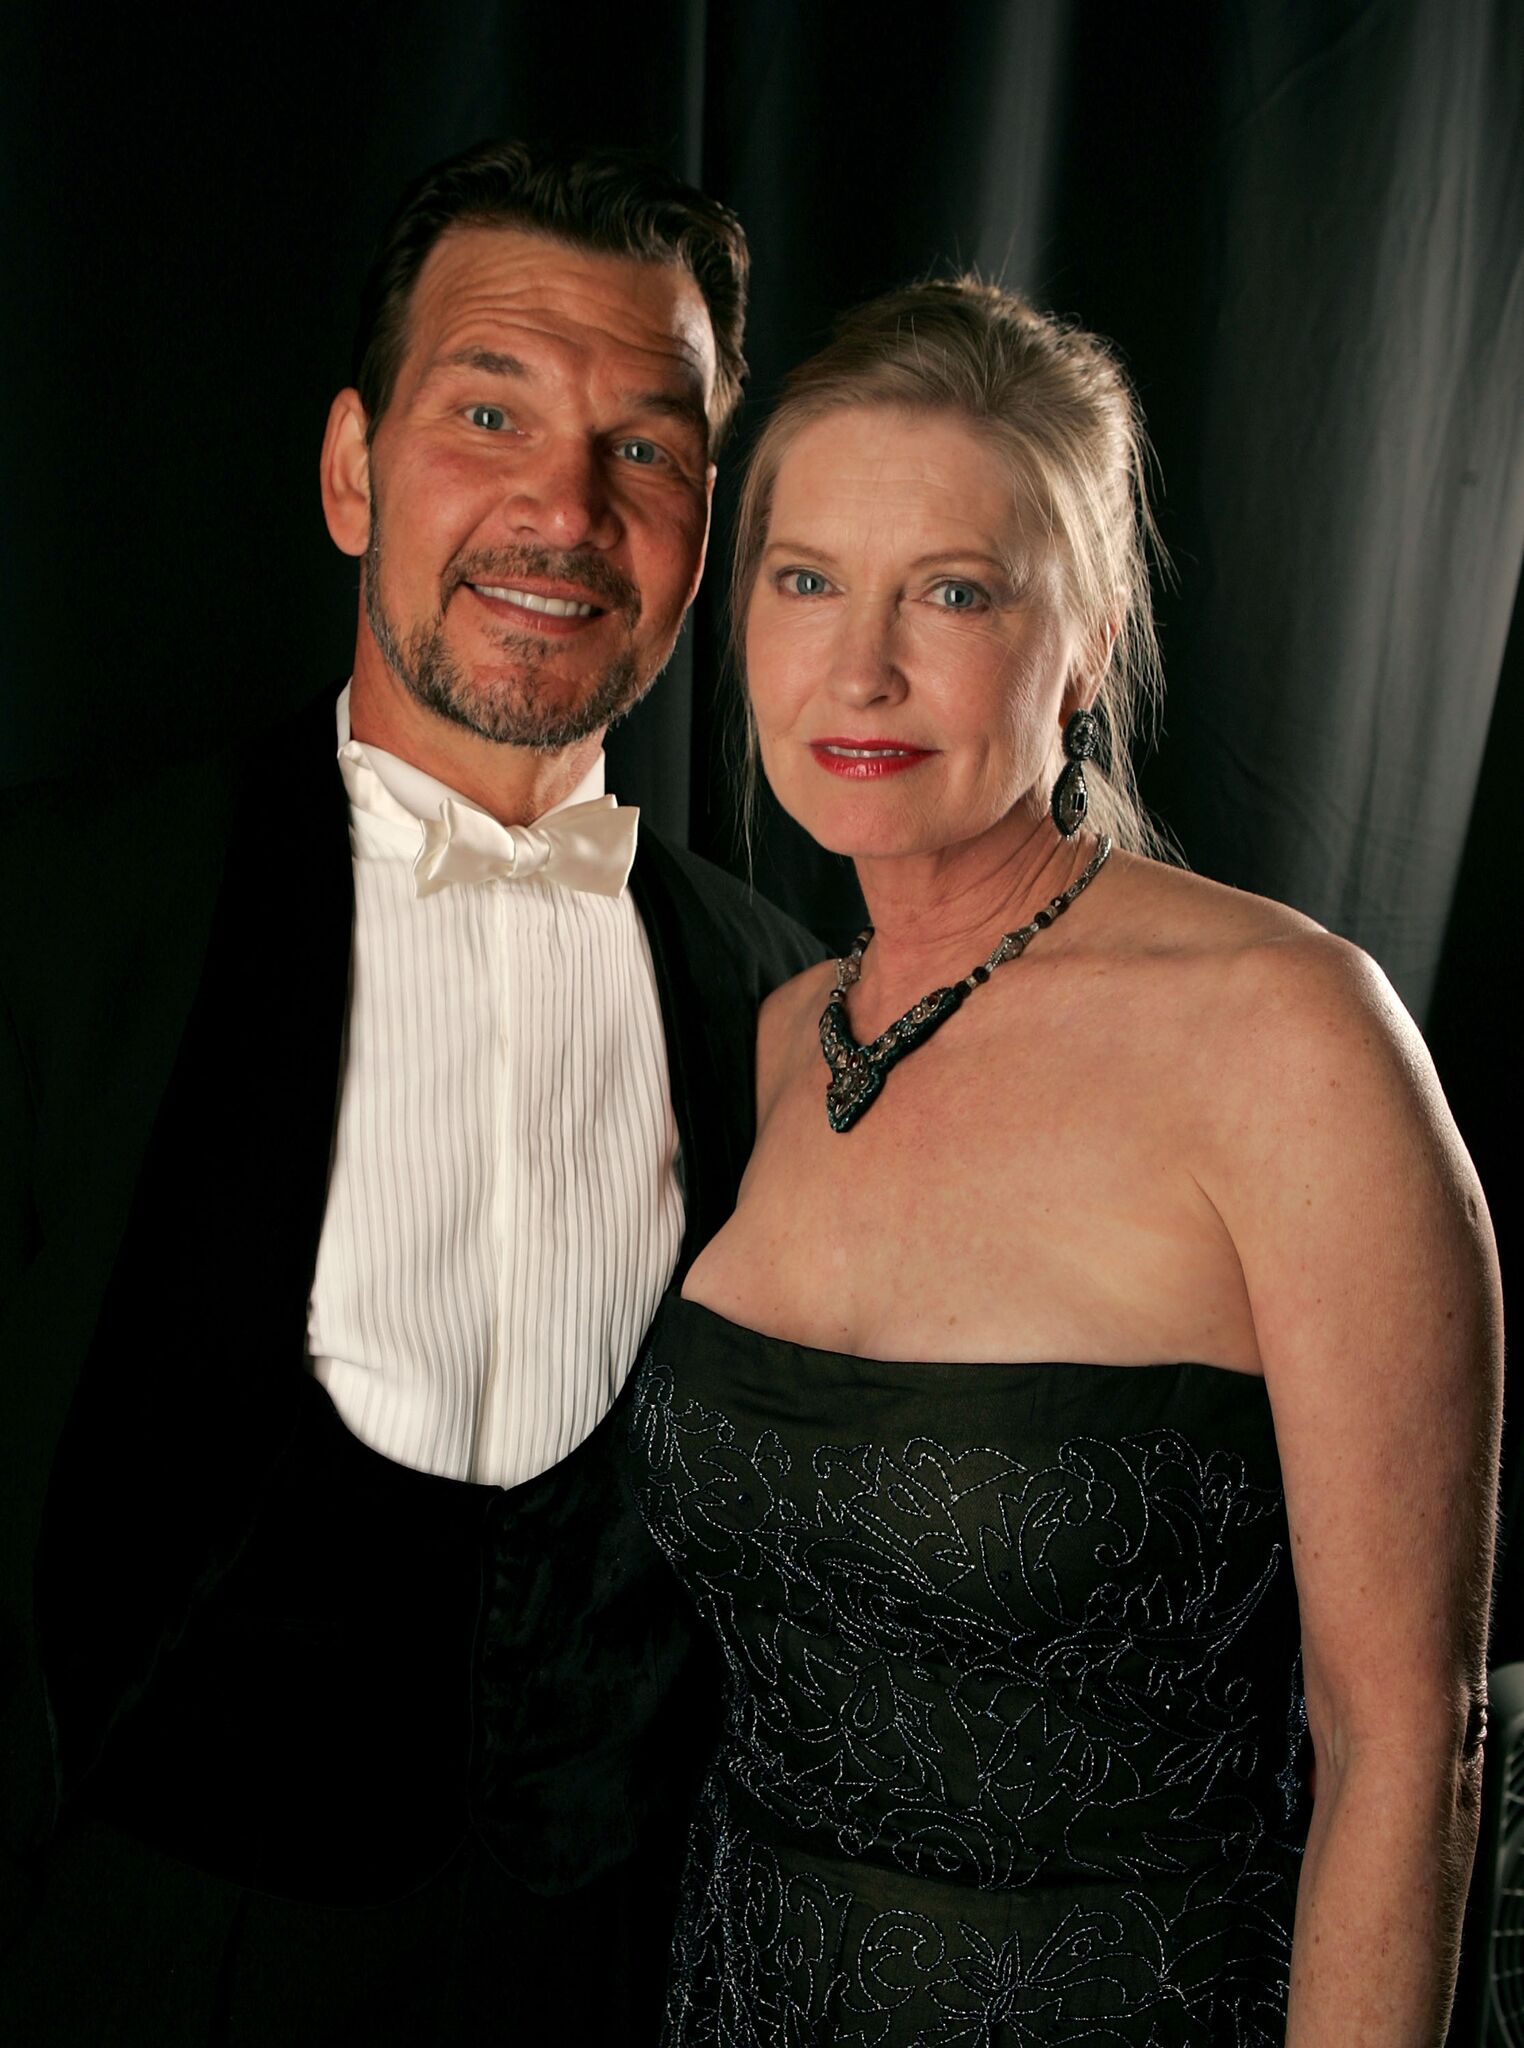  Patrick Swayze and wife Lisa Niemi at the 9th annual Costume Designers Guild Awards in 2007 | Getty Images